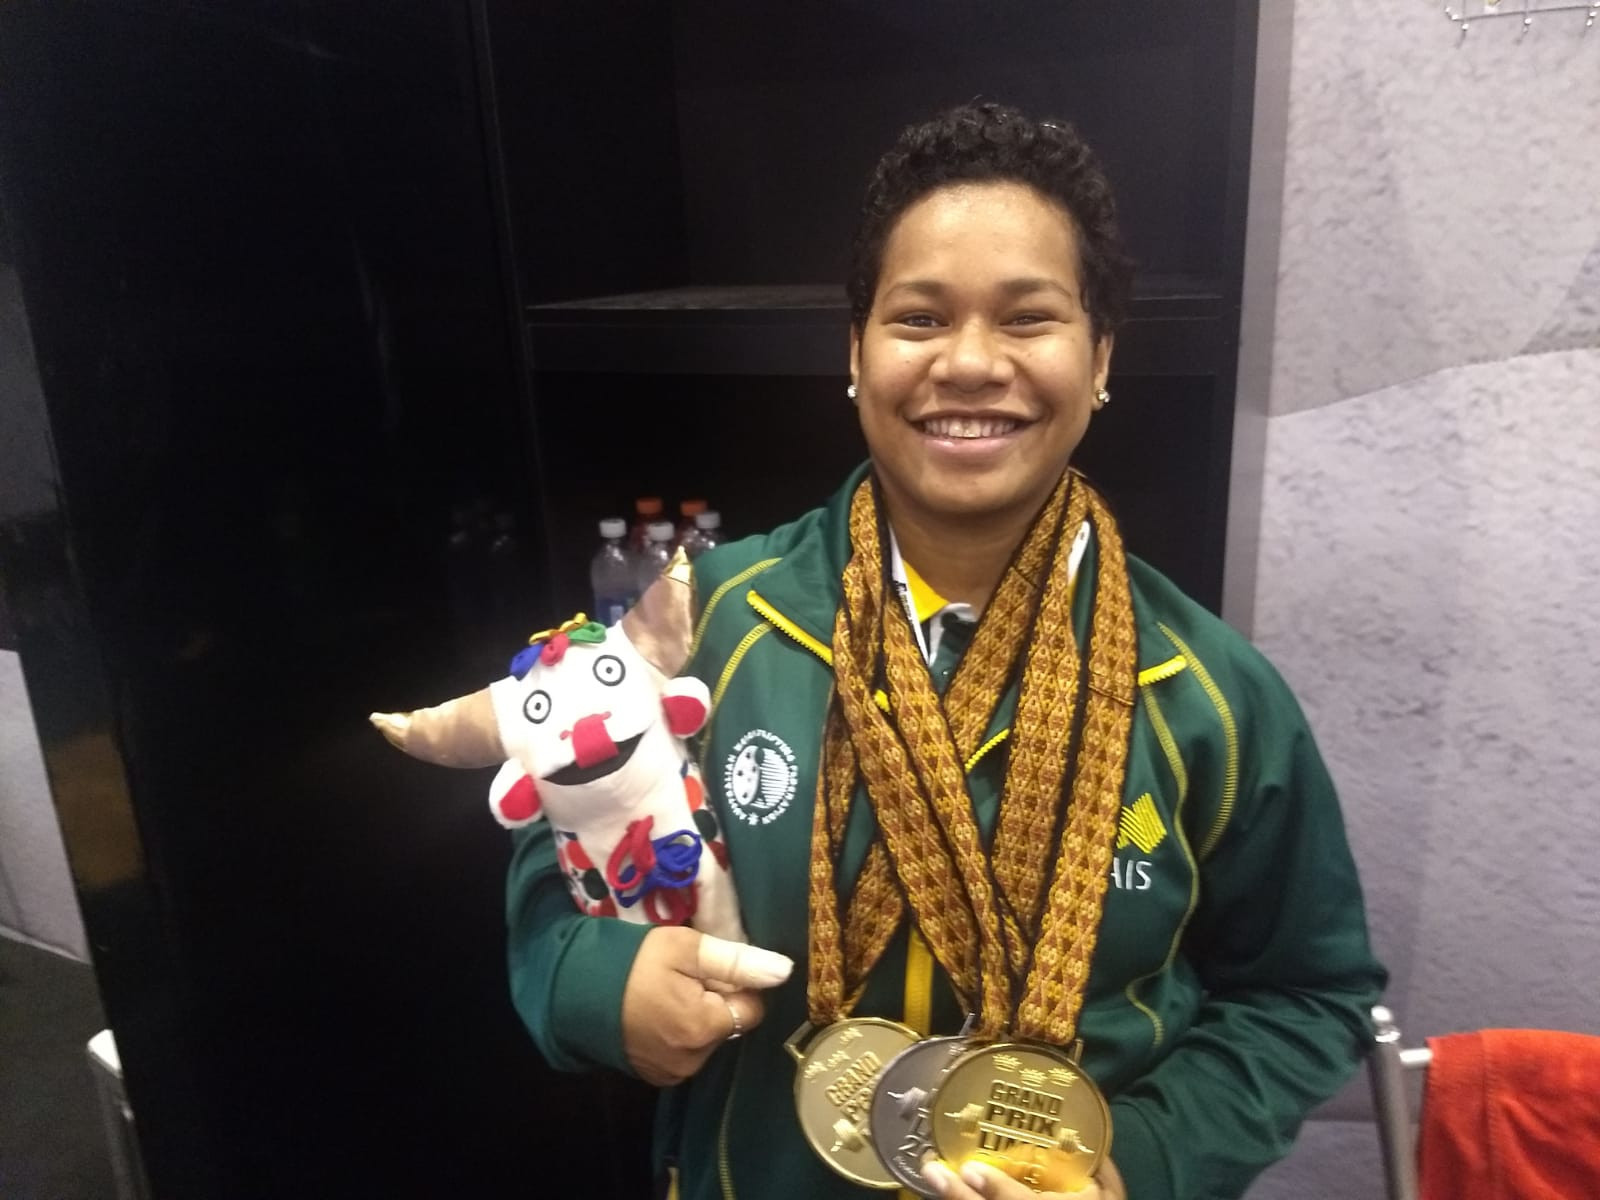 Australia’s new weightlifting sensation can break world records - but she cannot go to Tokyo 2020